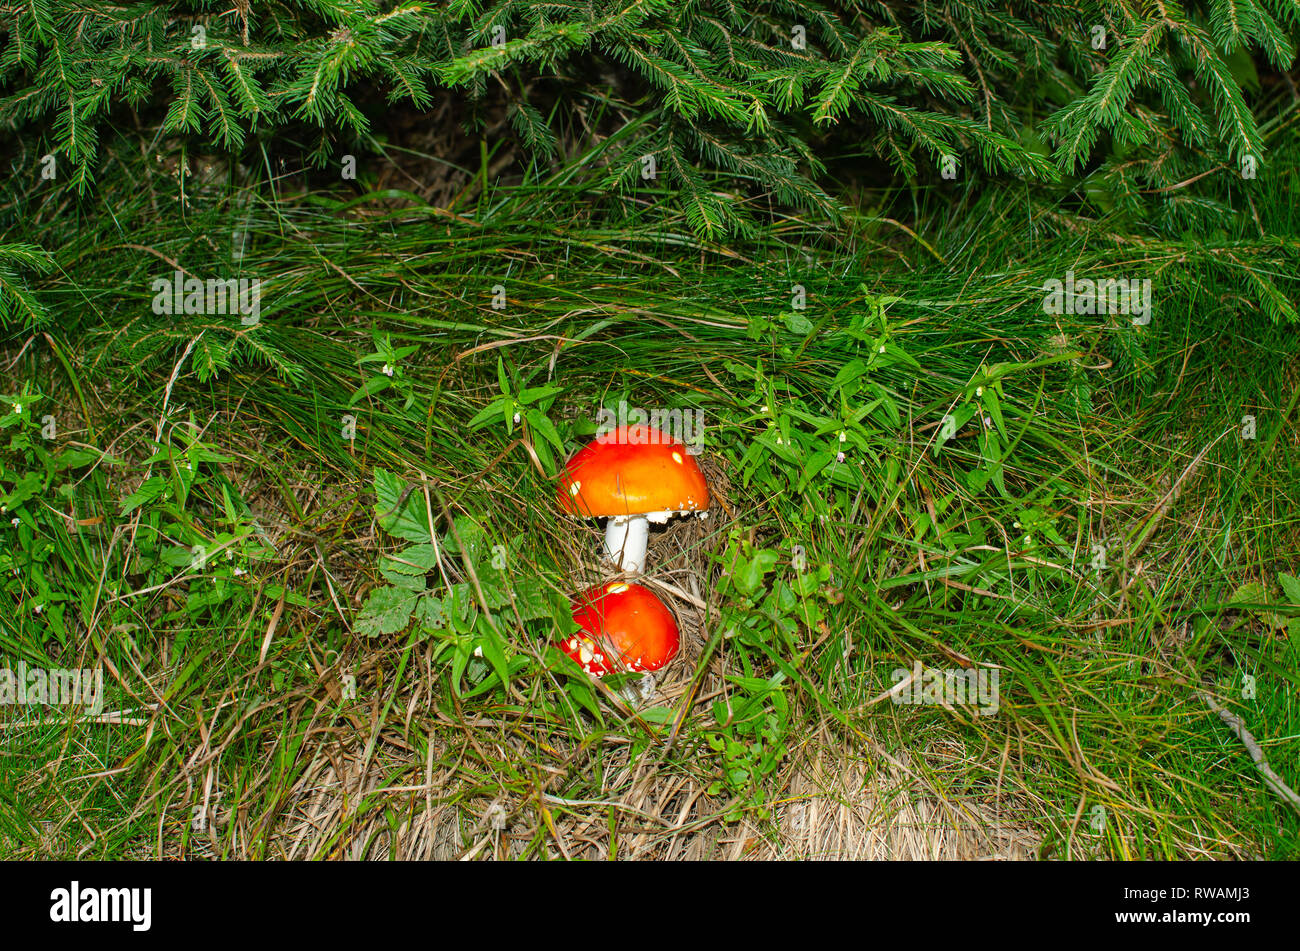 Two red mushrooms hidden in green grass Stock Photo